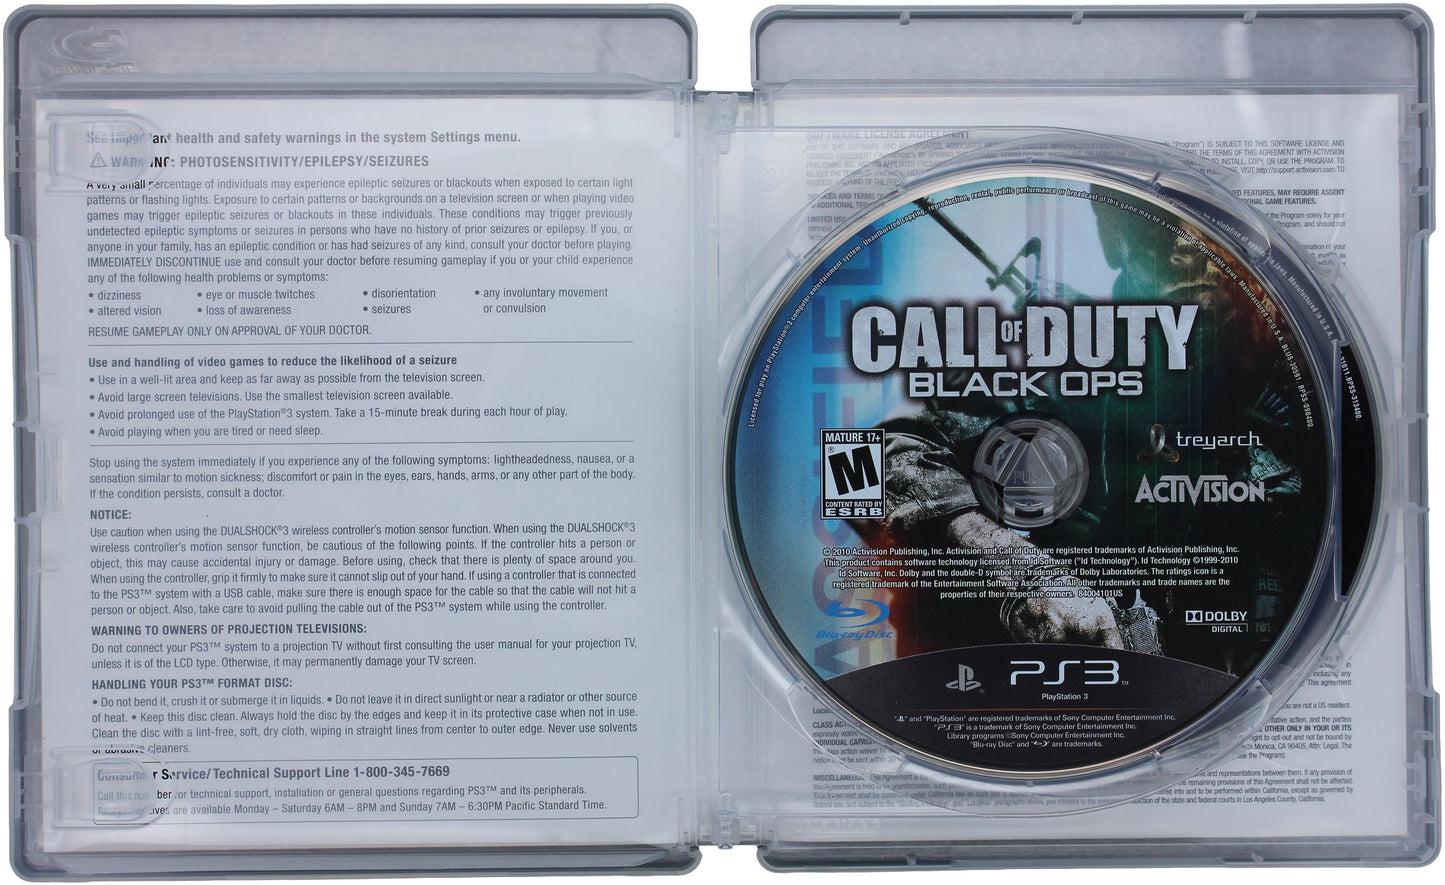 Call Of Duty: Combo Pack